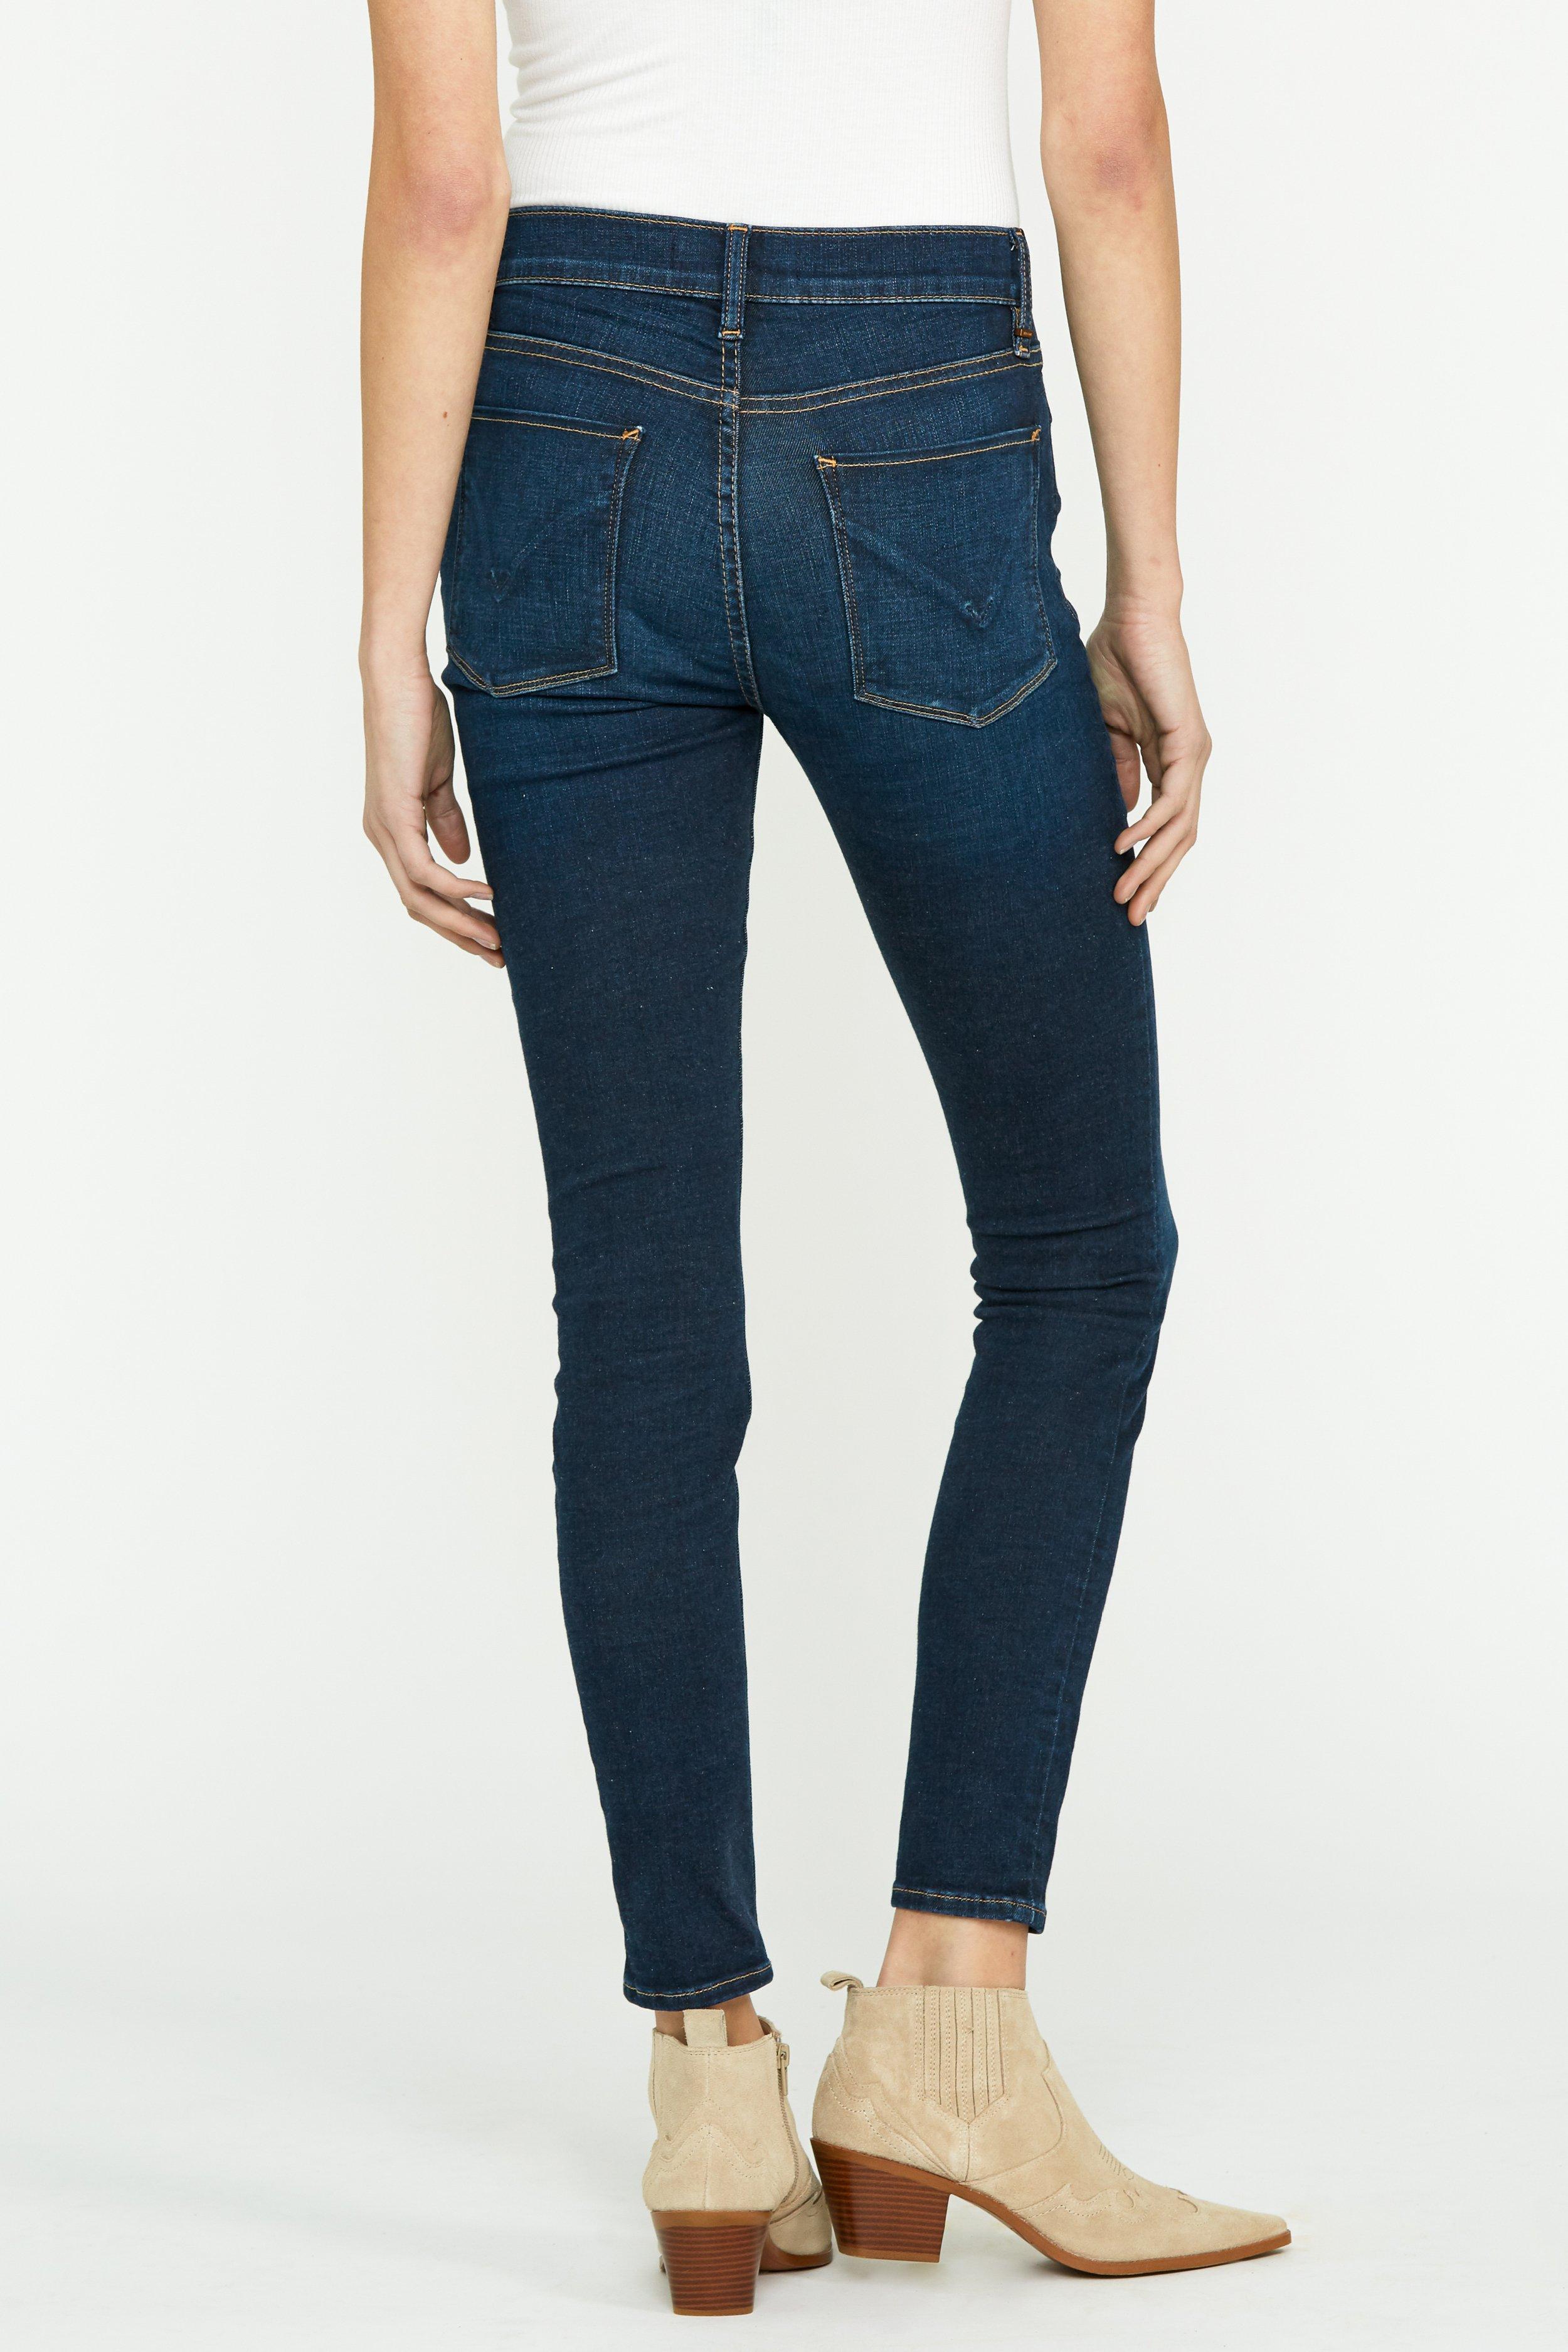 Hudson Jeans Cotton Barbara High-rise Super Skinny Ankle Jean in Blue